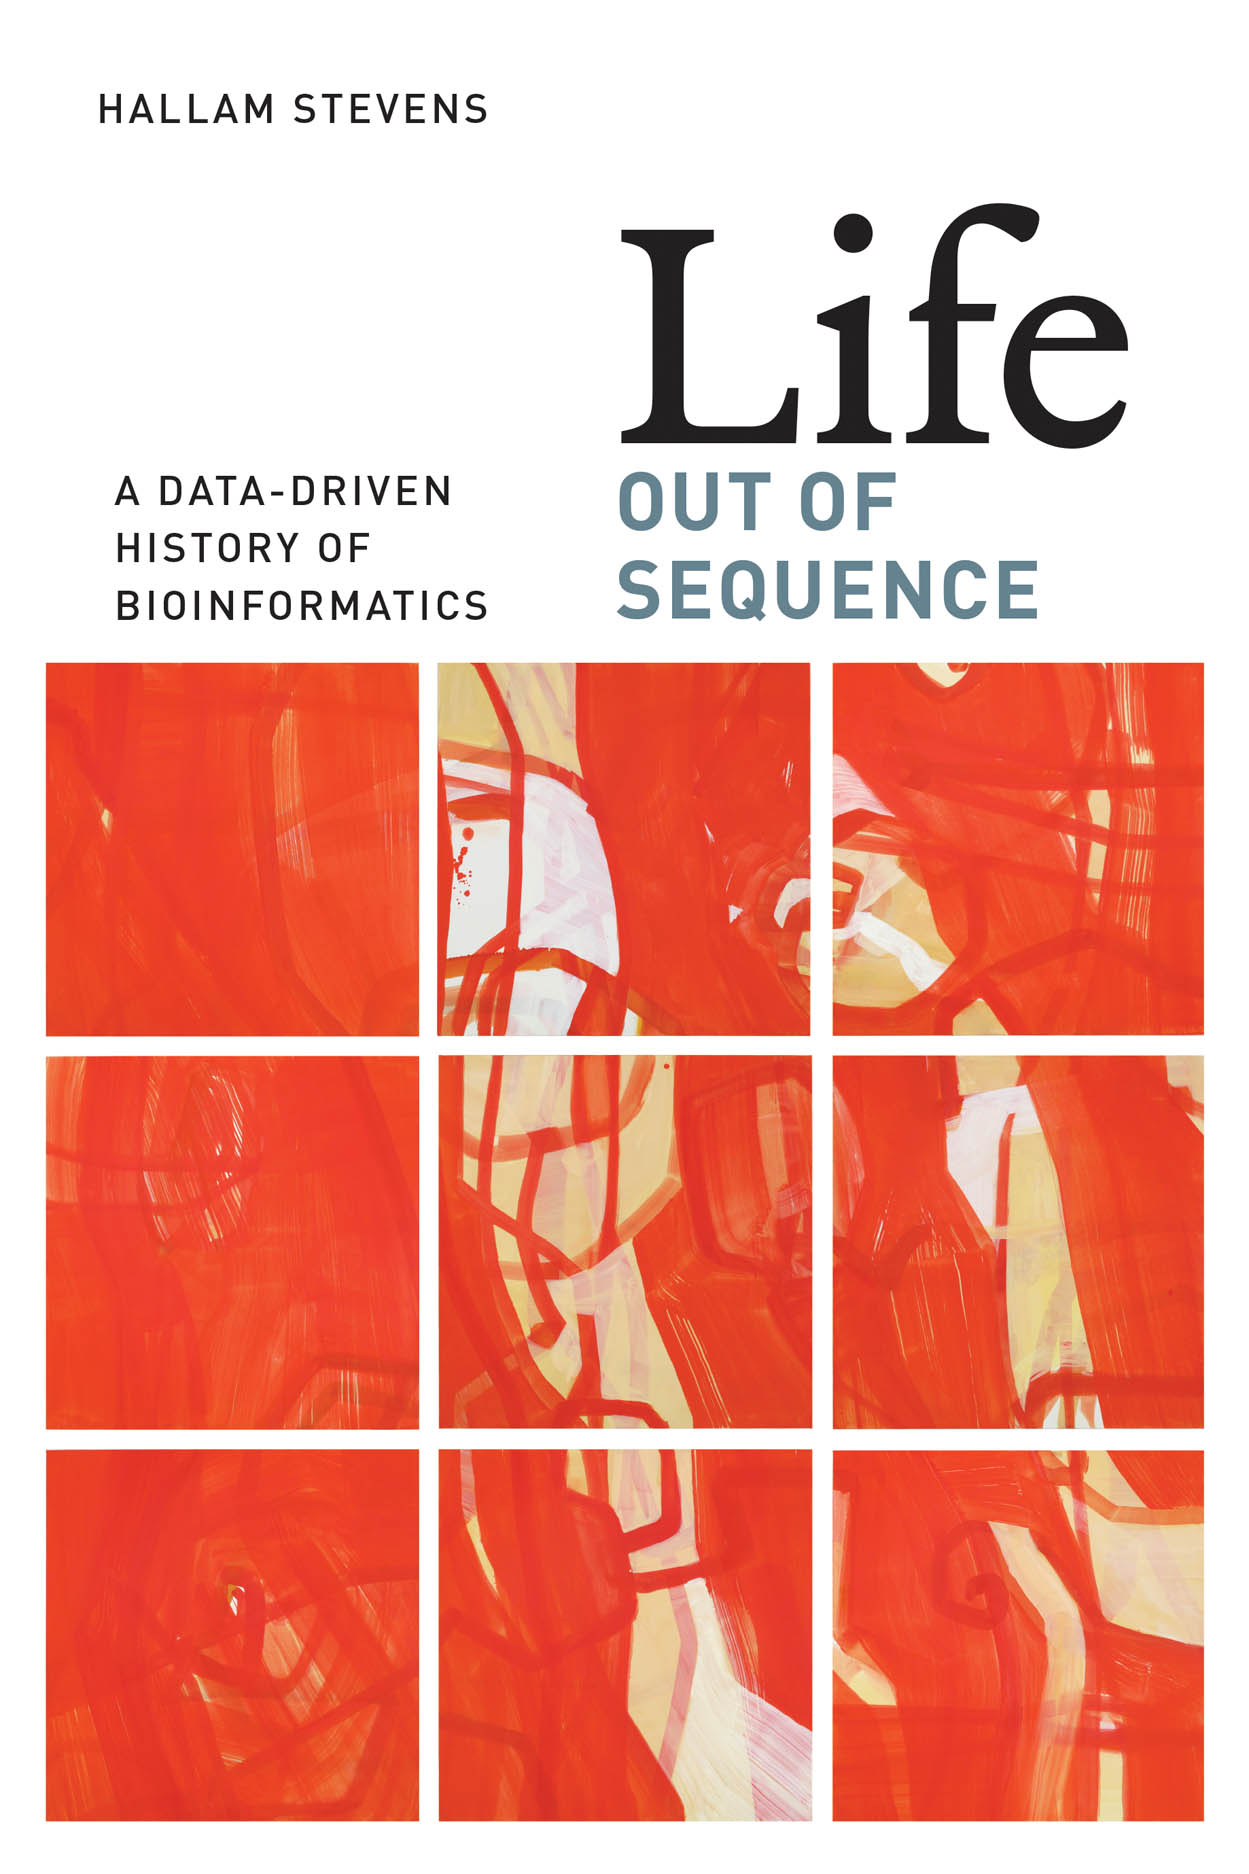 Life Out of Sequence: A Data-Driven History of Bioinformatics, Stevens